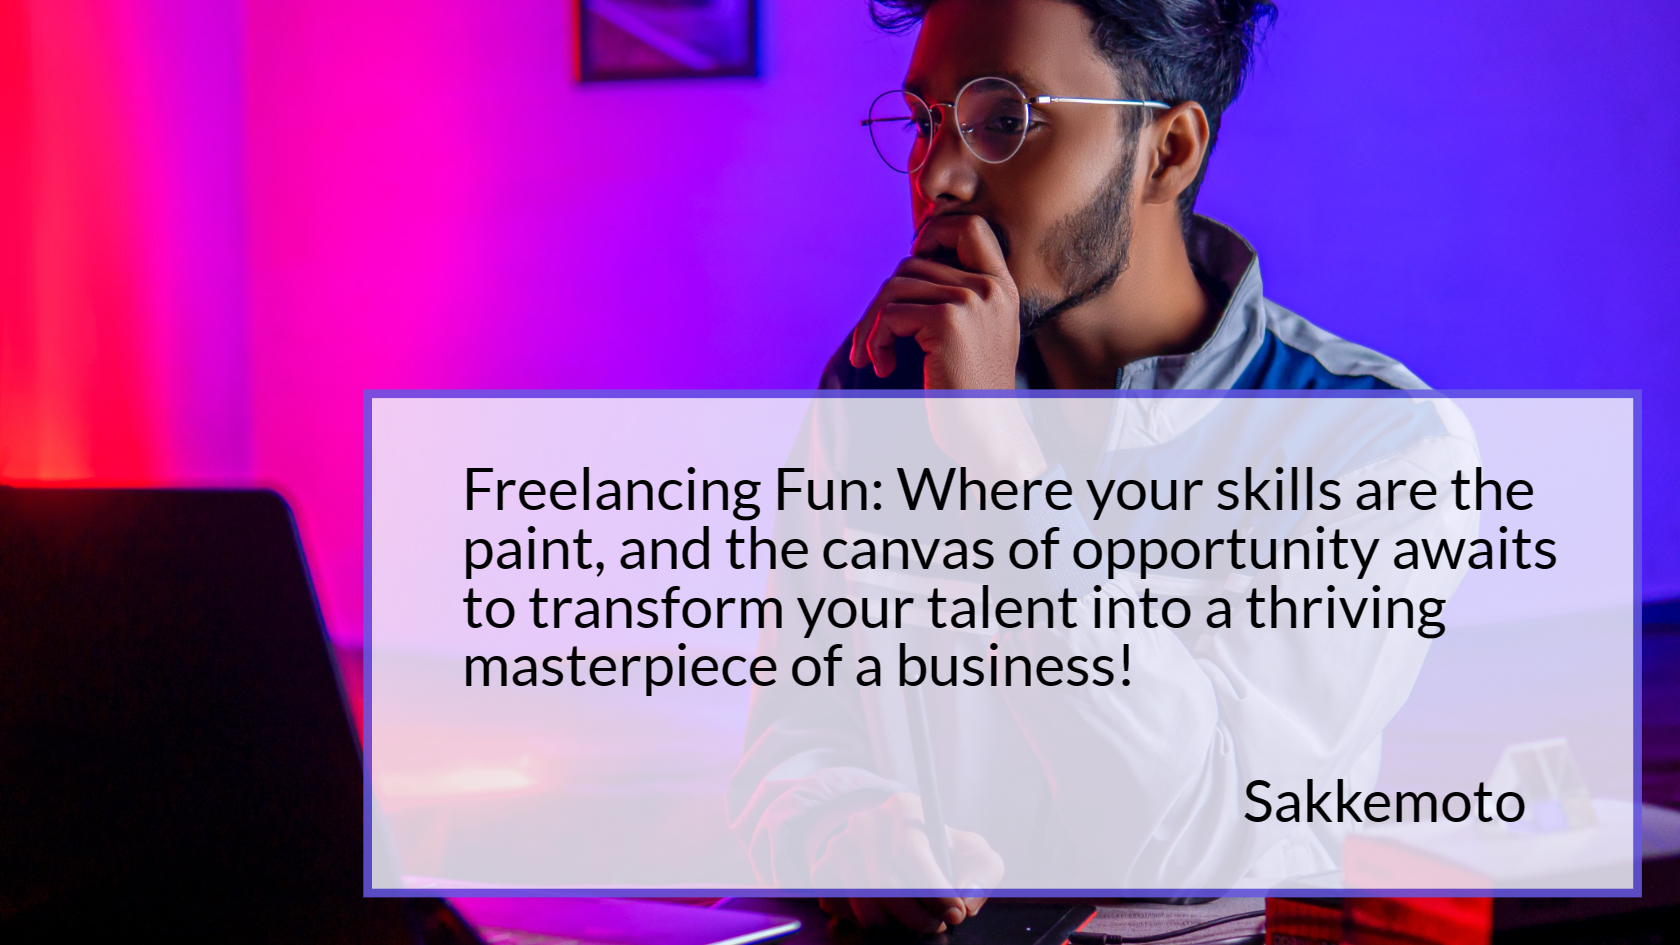 skilled Freelancing Fun Where your skills are the paint, and the canvas of opportunity awaits to transform your talent into a thriving masterpiece